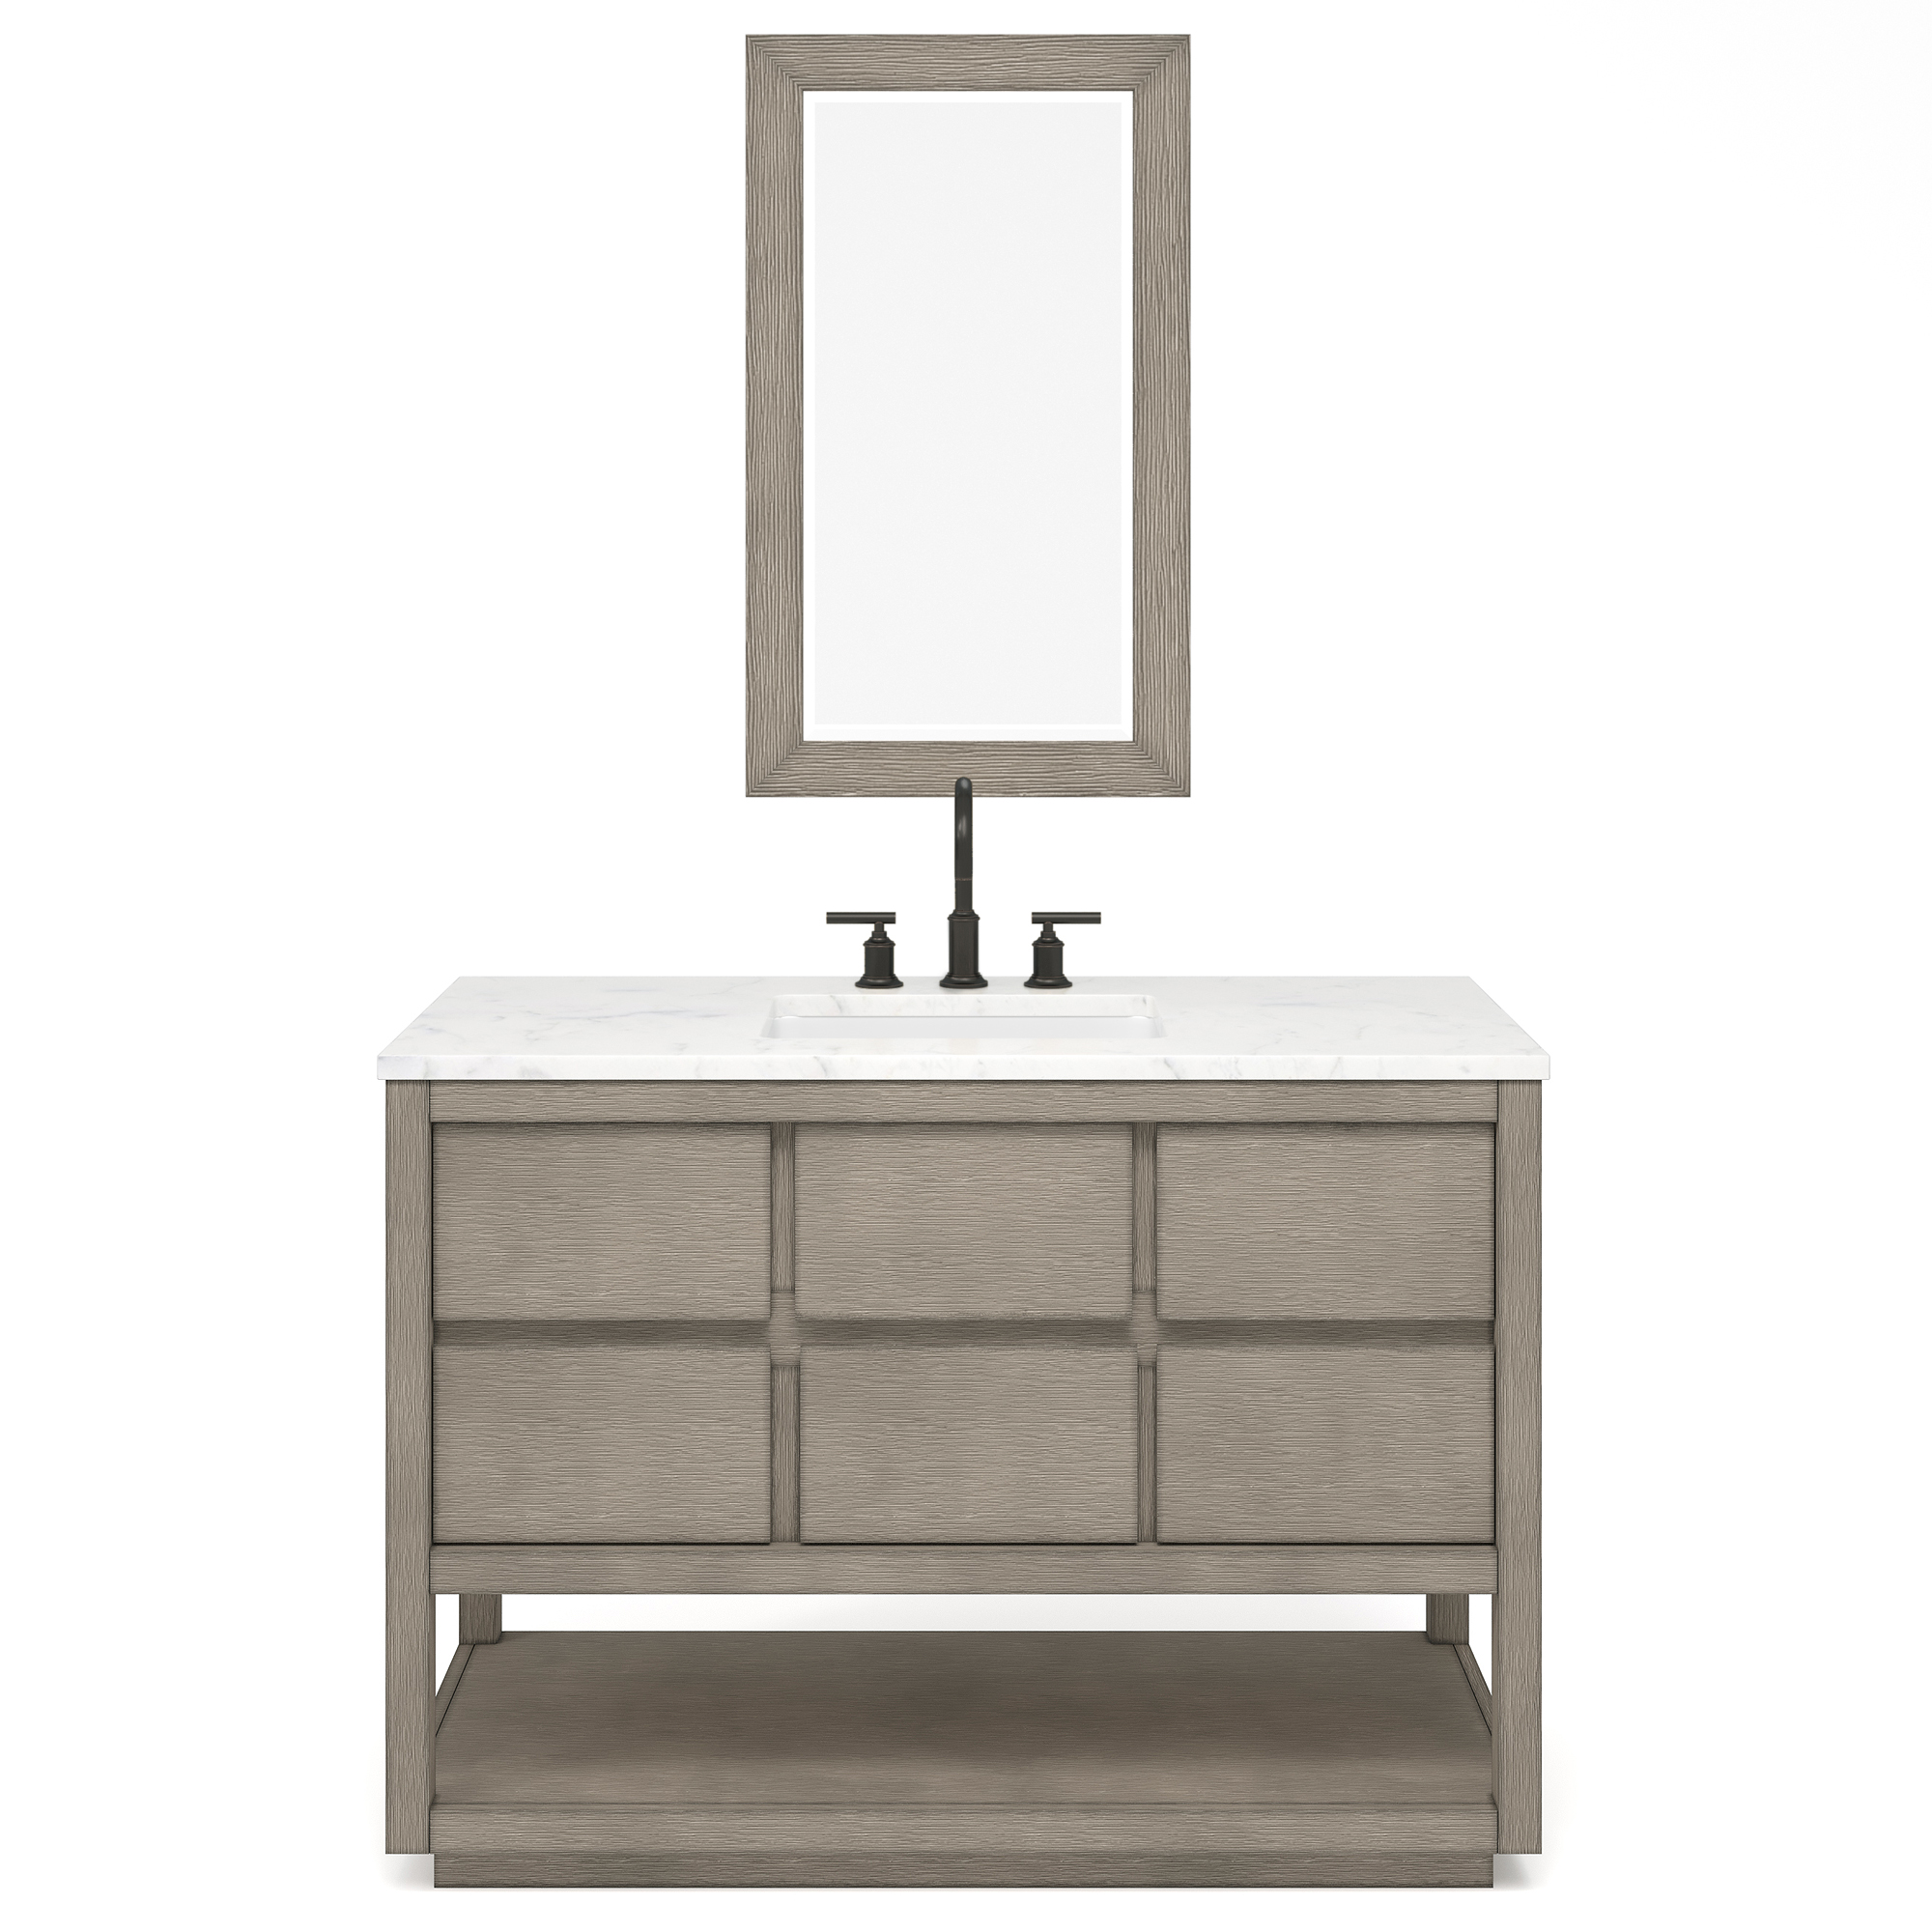 36" White Single Sink Vanity, Boulder Cultured Marble Vanity Top, Undermount Rectangle Bowl with Countertop Options